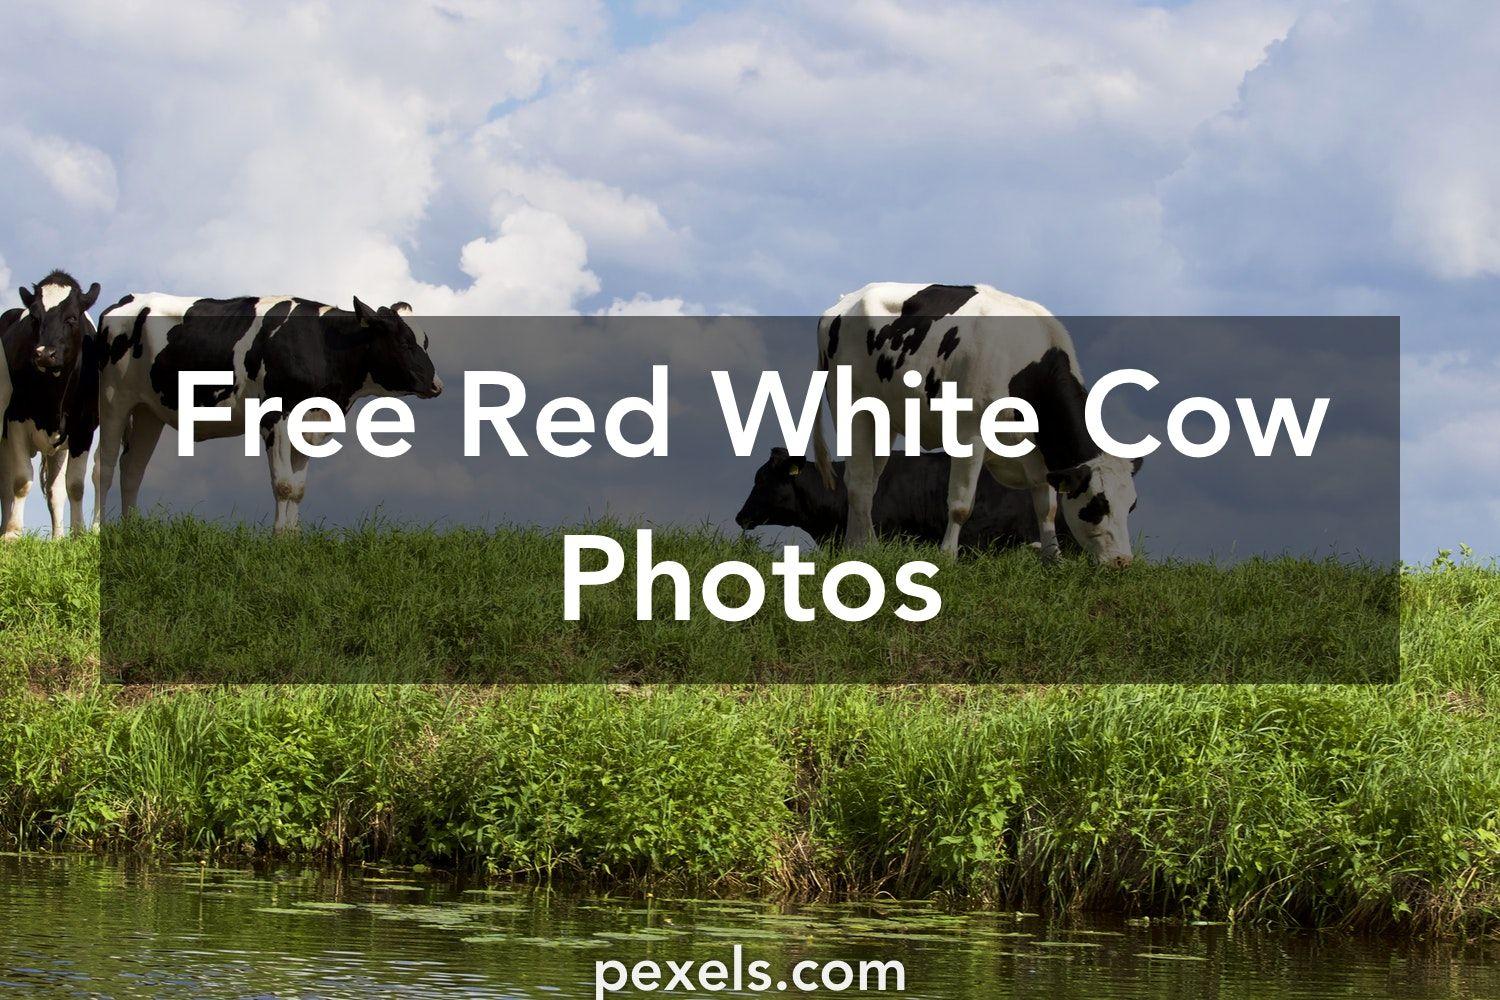 Red White Cow Logo - Beautiful Red White Cow Photo